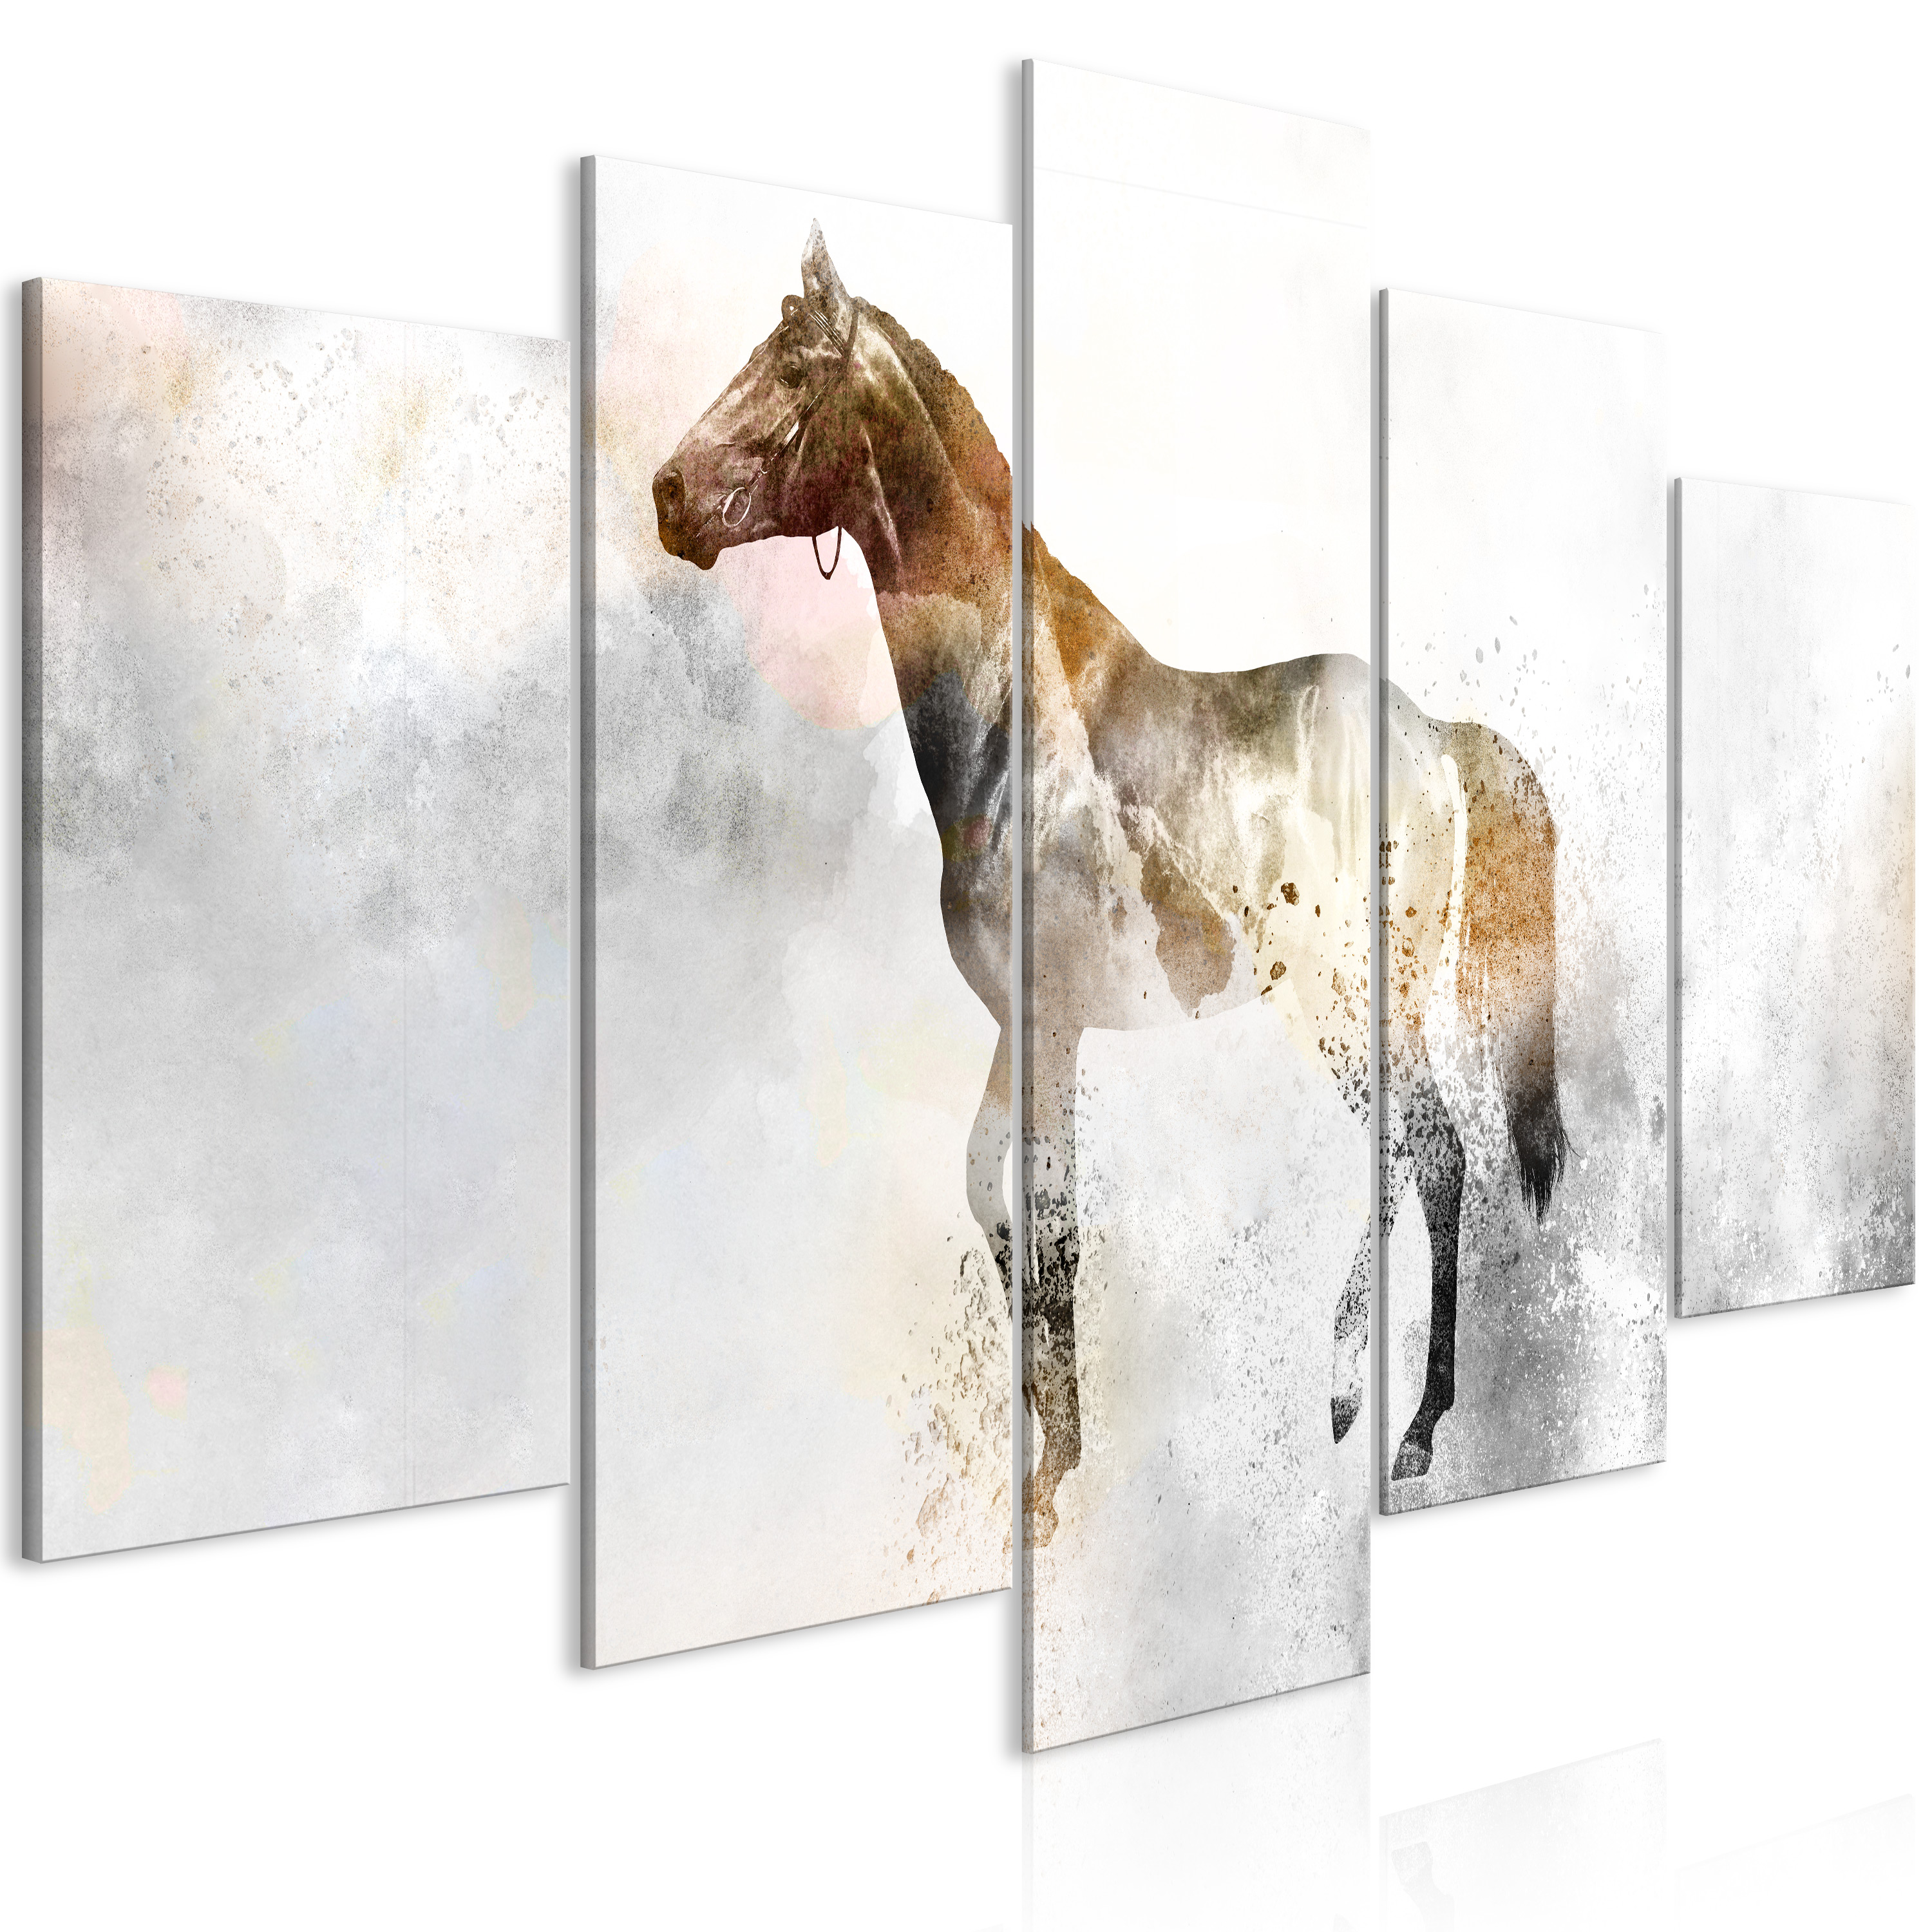 Canvas Print - Fiery Steed (5 Parts) Wide - 100x50